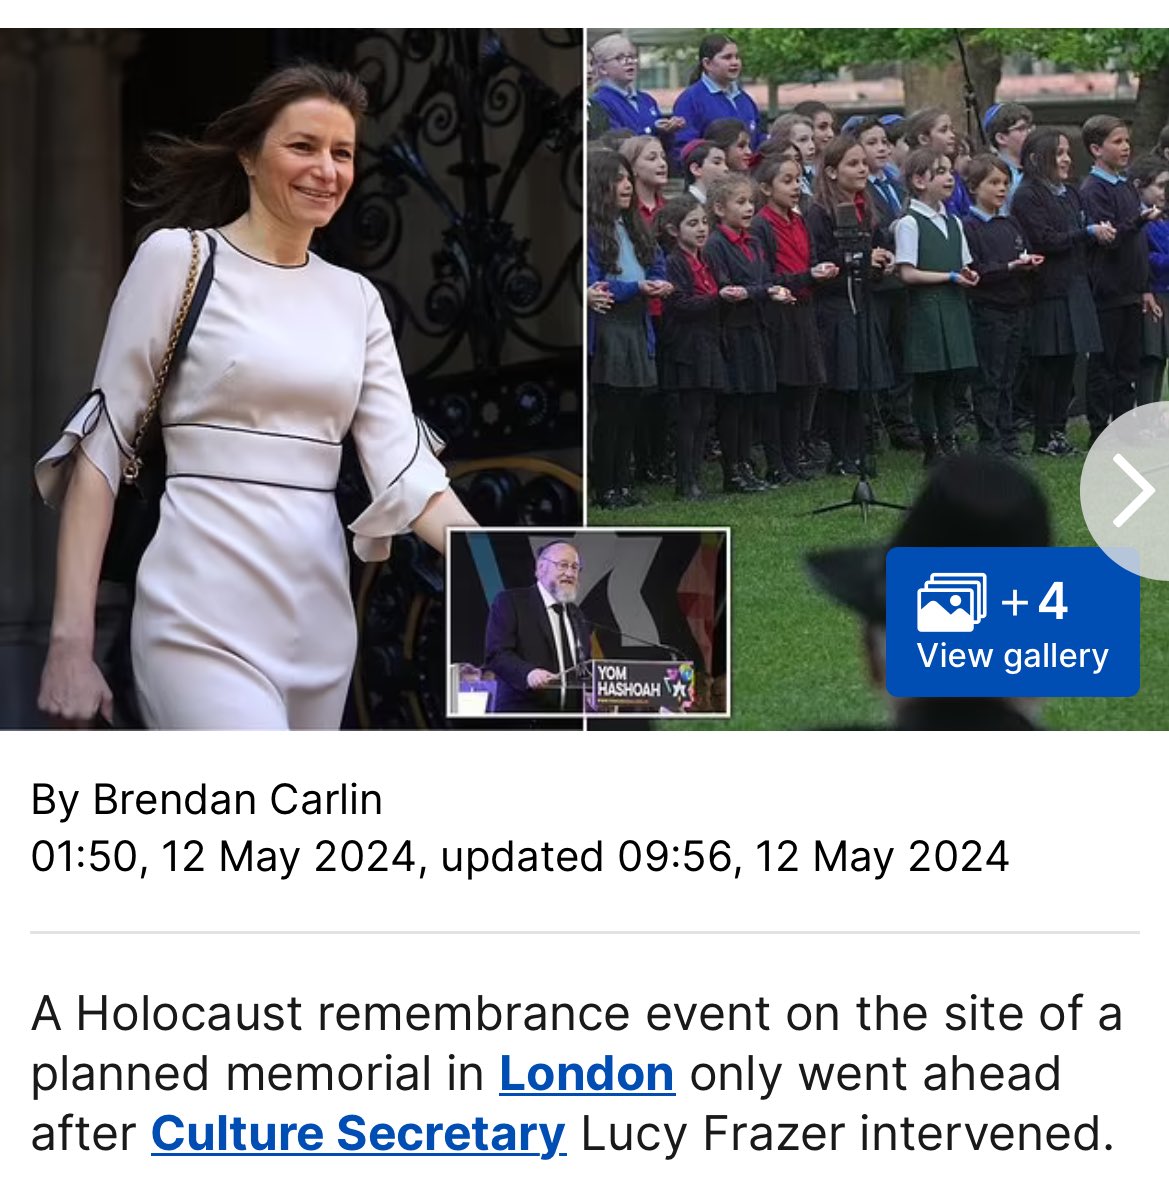 Context for last weekend’s Yom HaShoah event which took place in Victoria Tower Gardens and required closure of the park for most of the day. A taste of things to come?